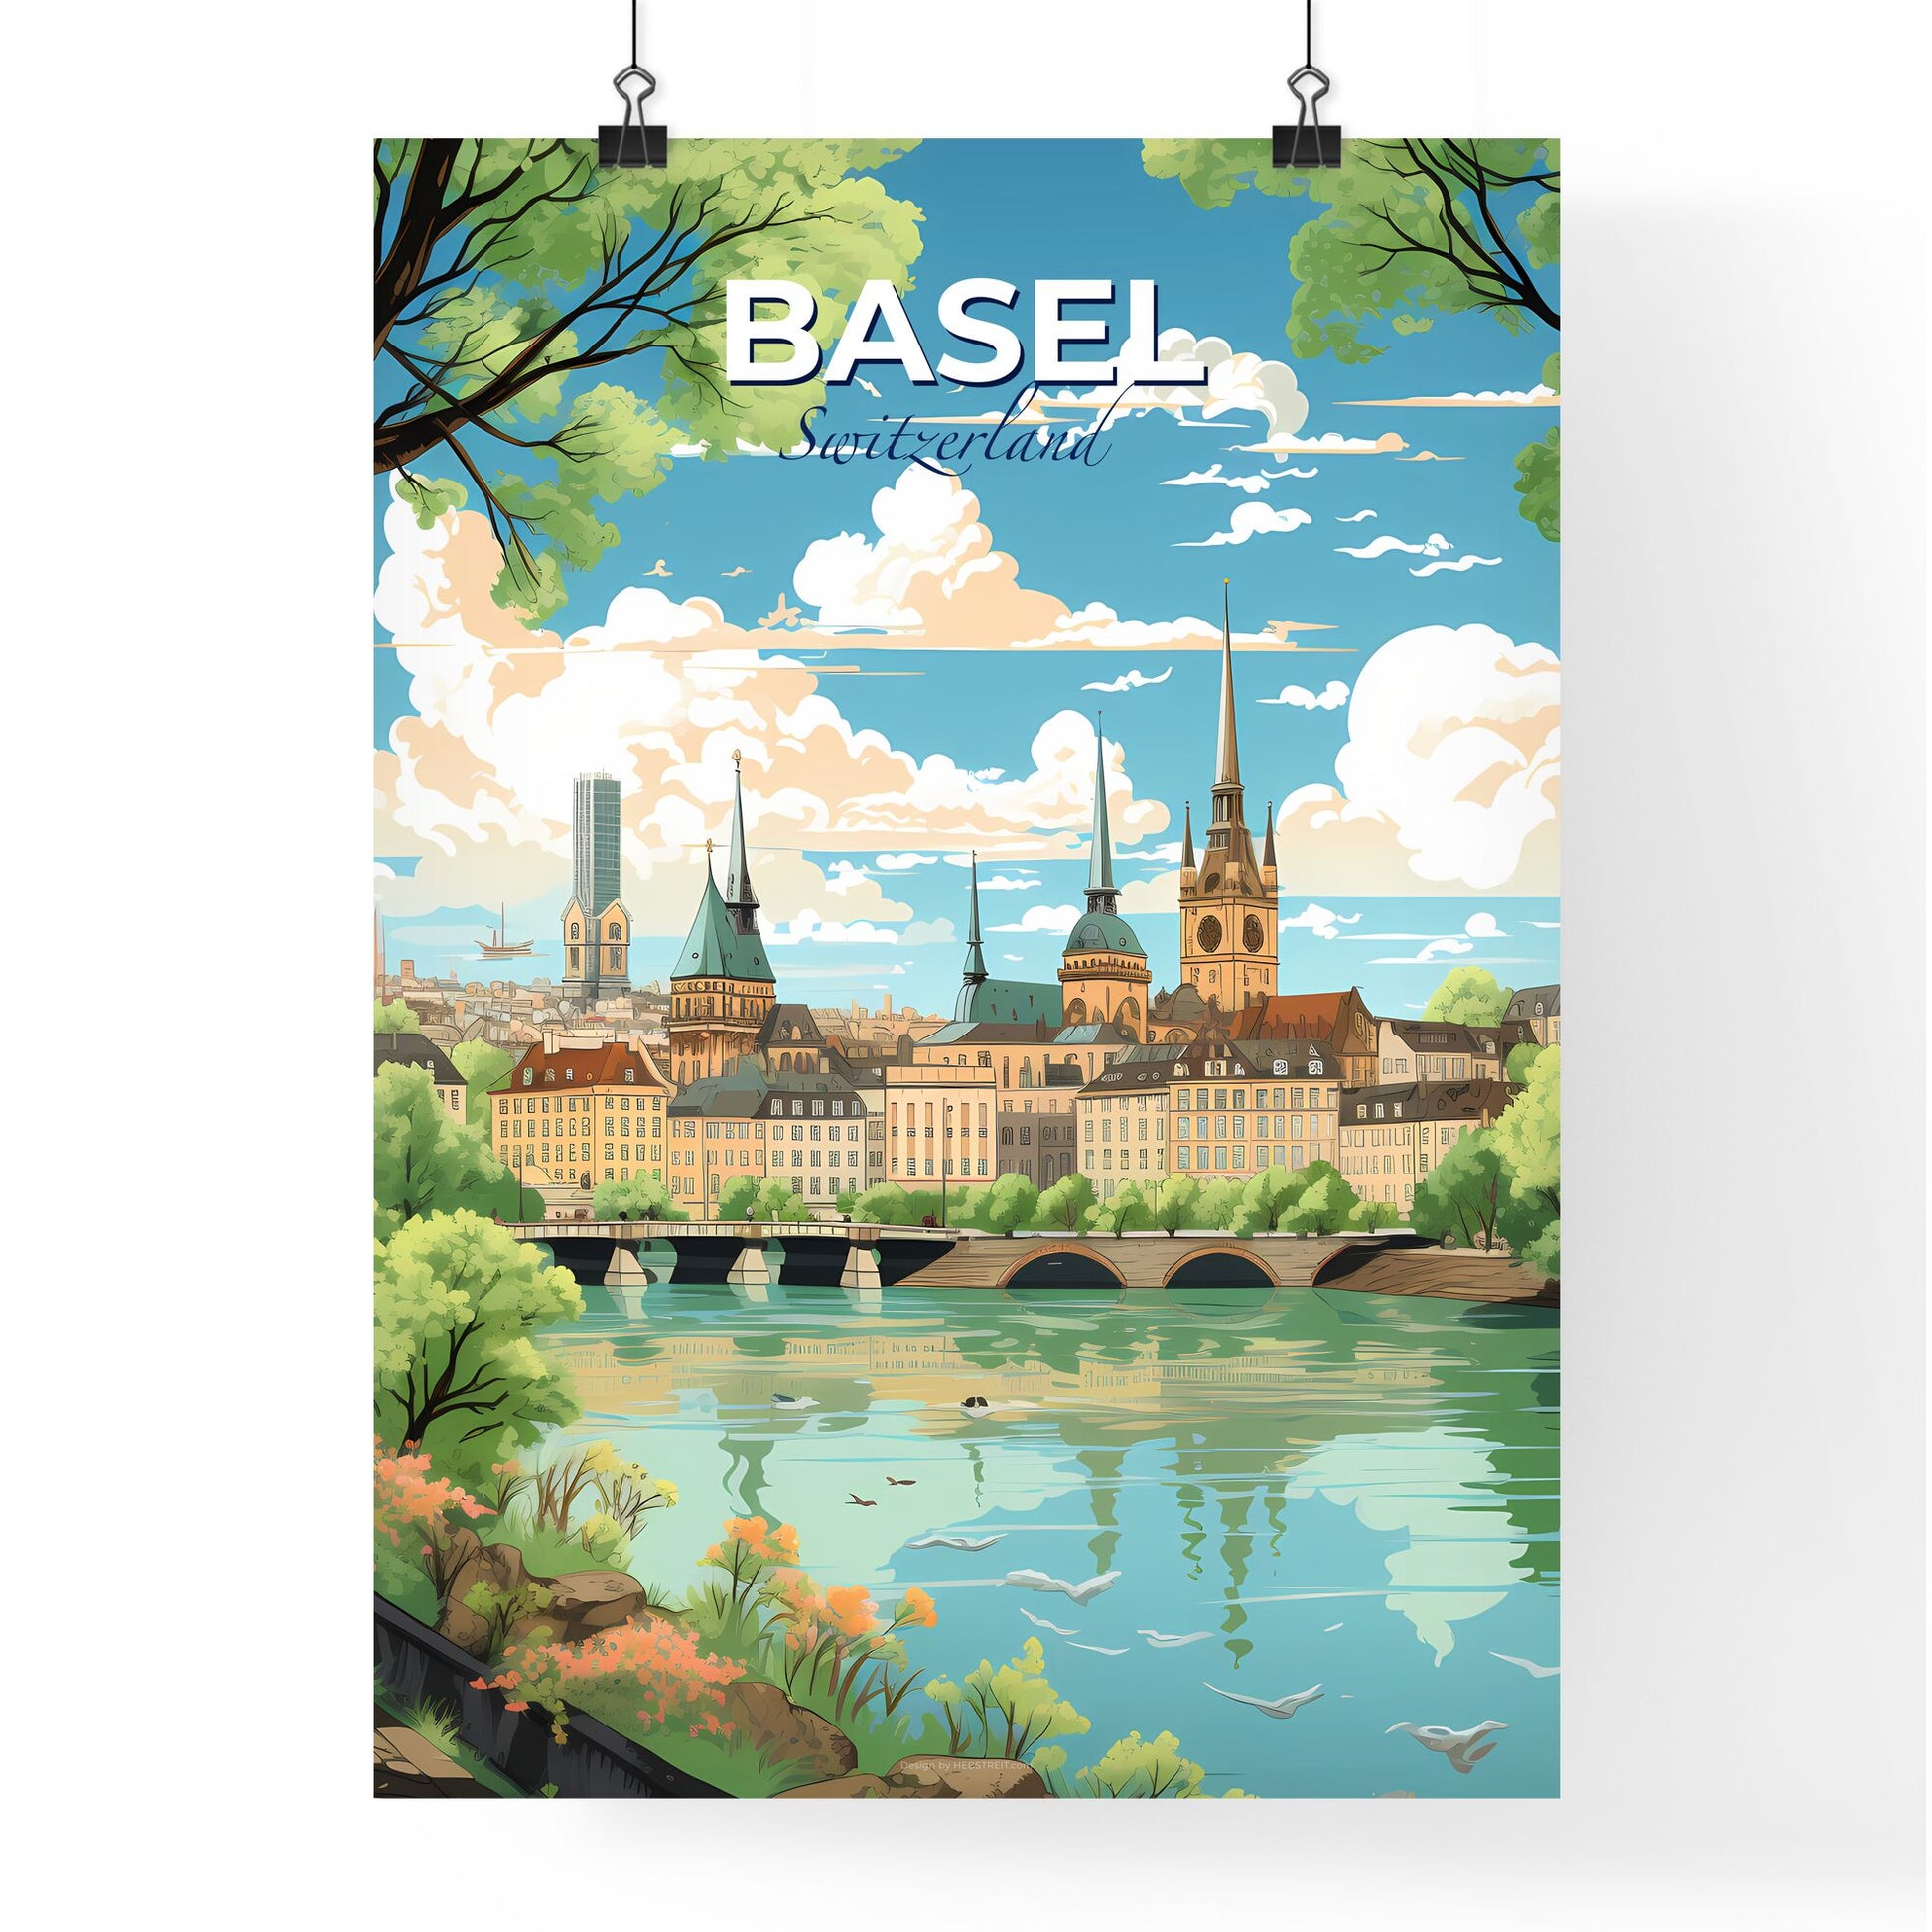 Basel Switzerland Skyline - A City With Trees And A Bridge Over Water - Customizable Travel Gift Default Title